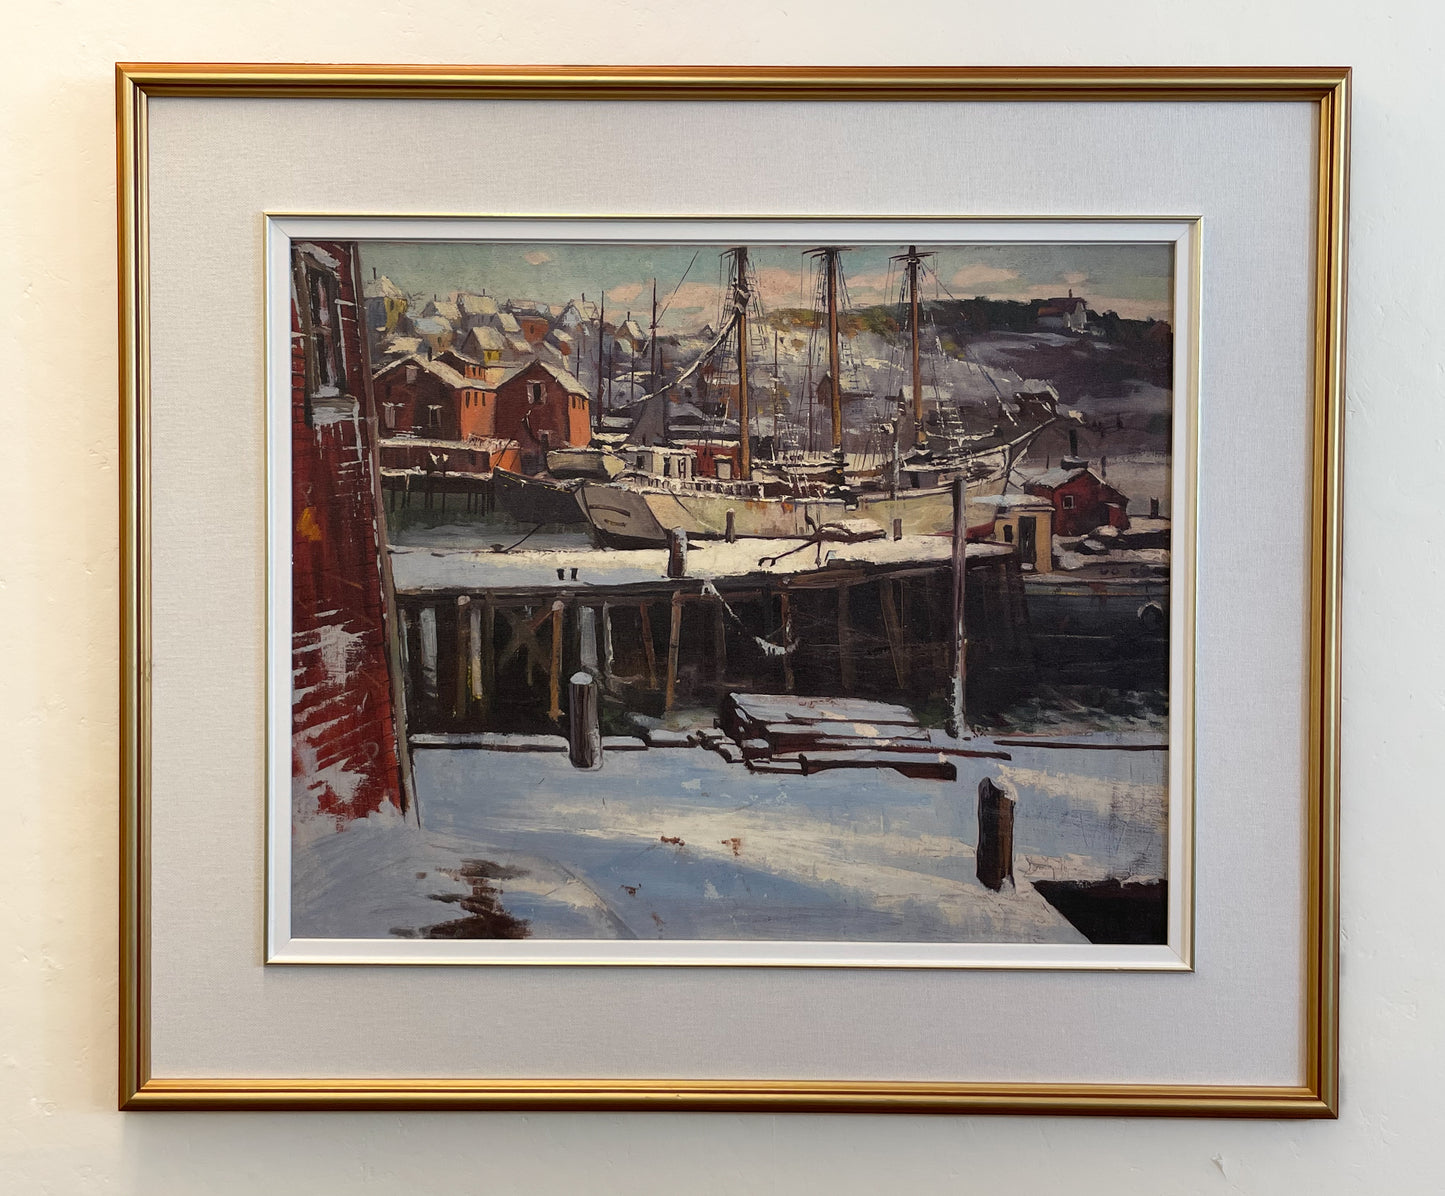 The "City of New York" Ship, in Lunenburg Harbour, an Oil Giclée